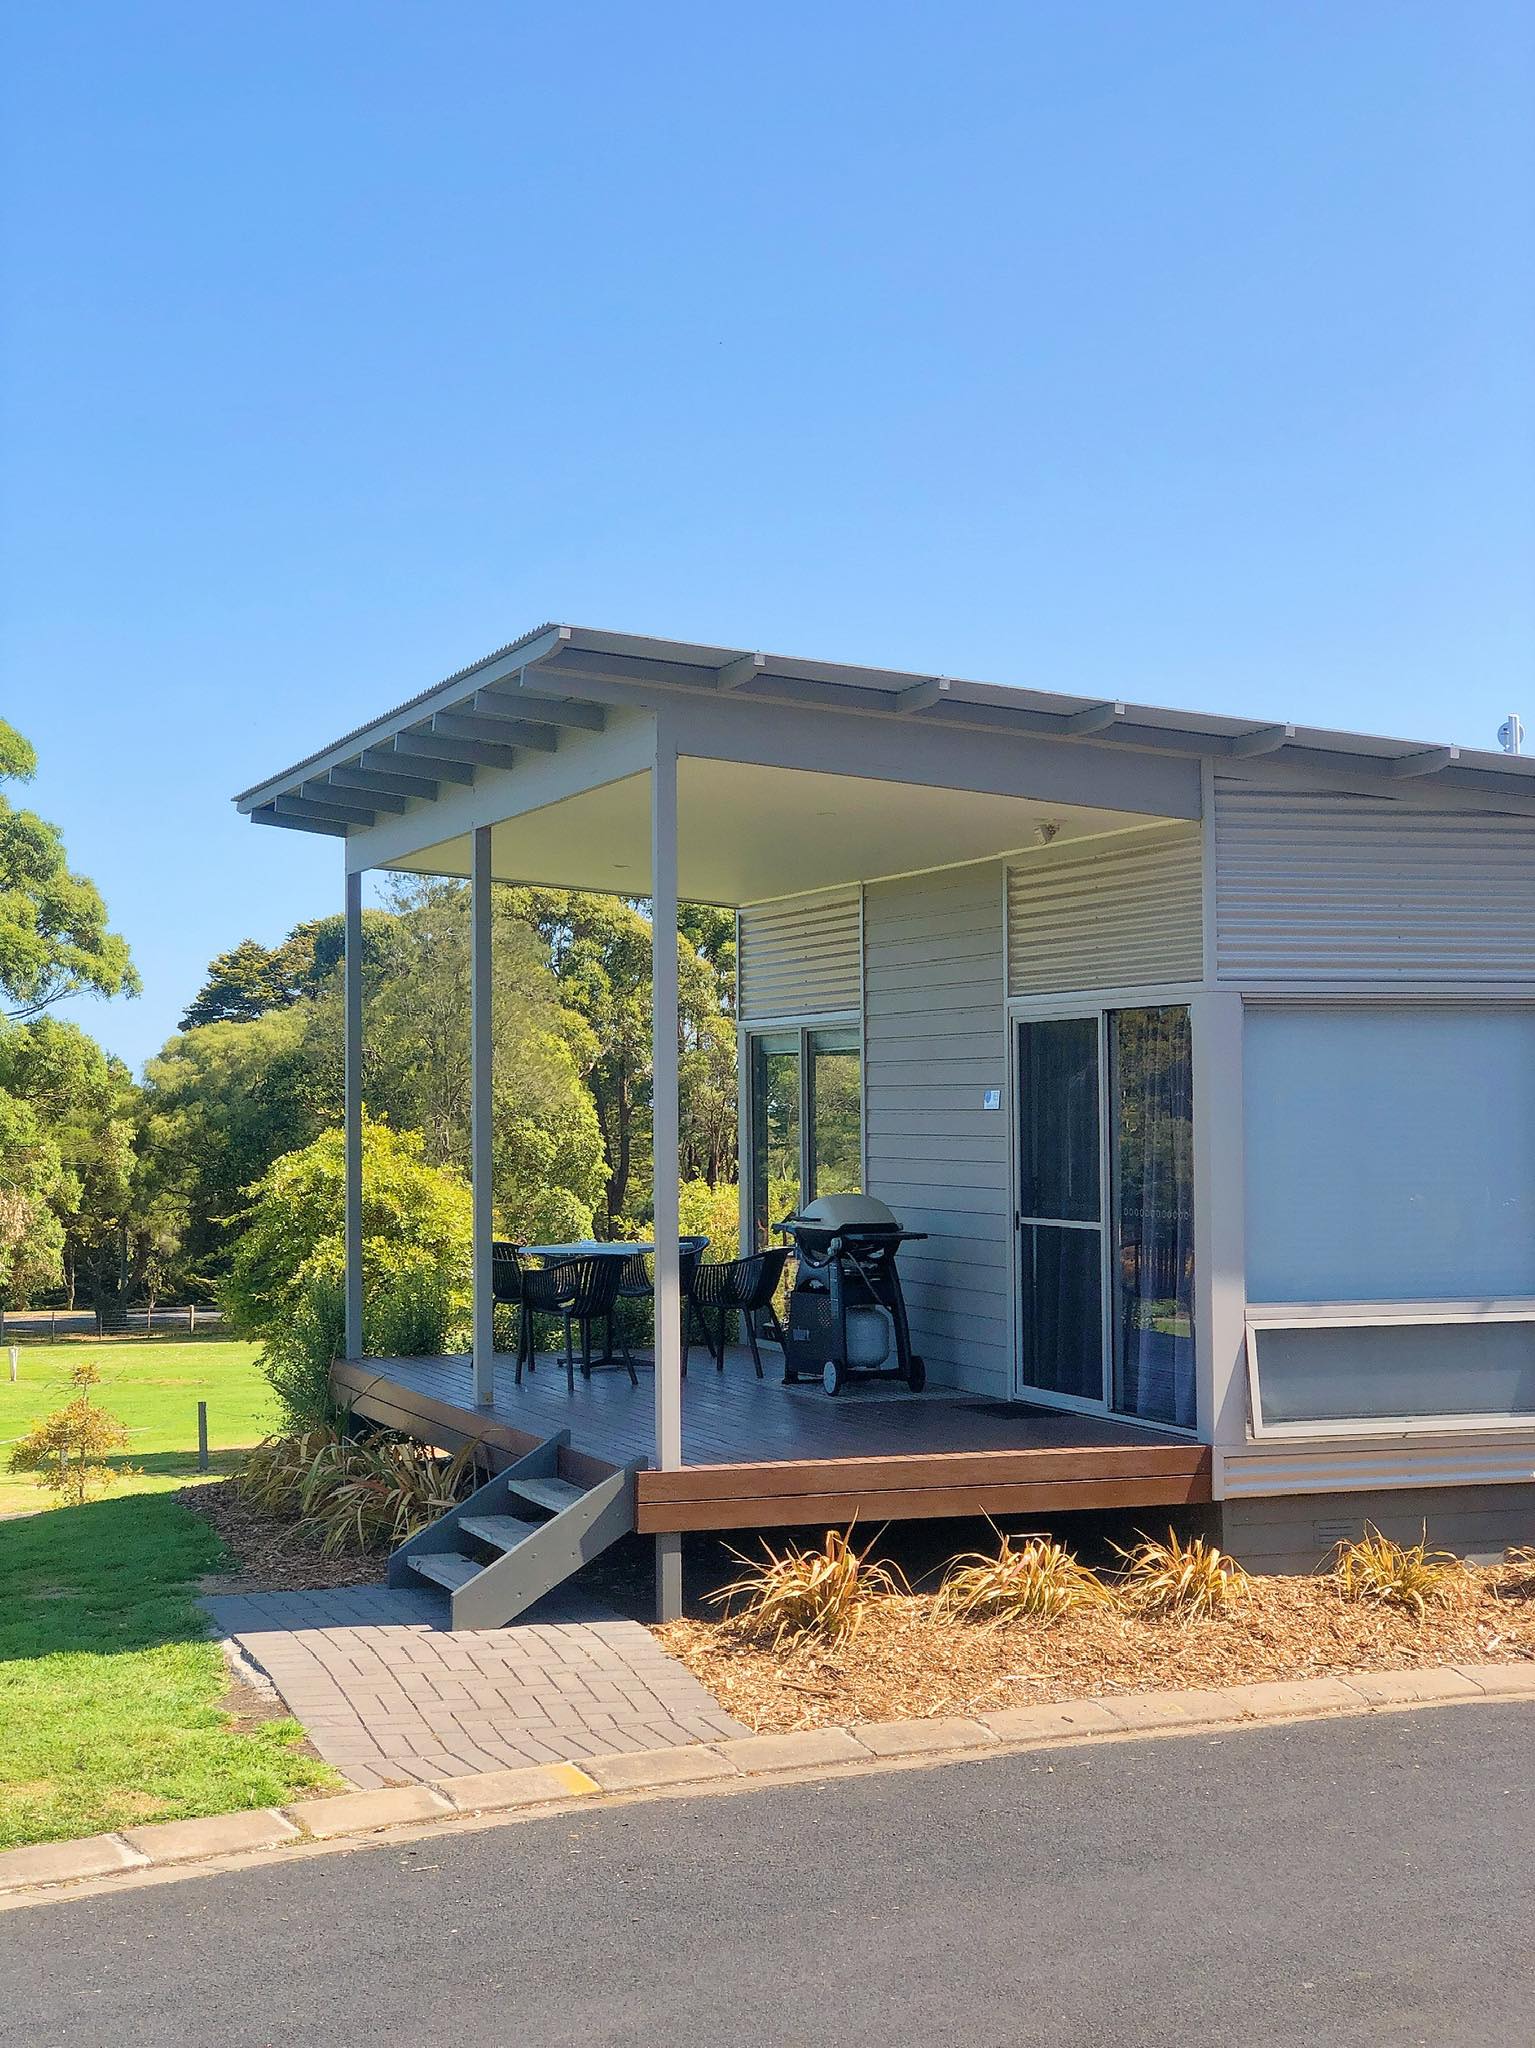 WIN an awesome getaway to Mount Gambier, with two nights accommodation at Blue Lake Holiday Park